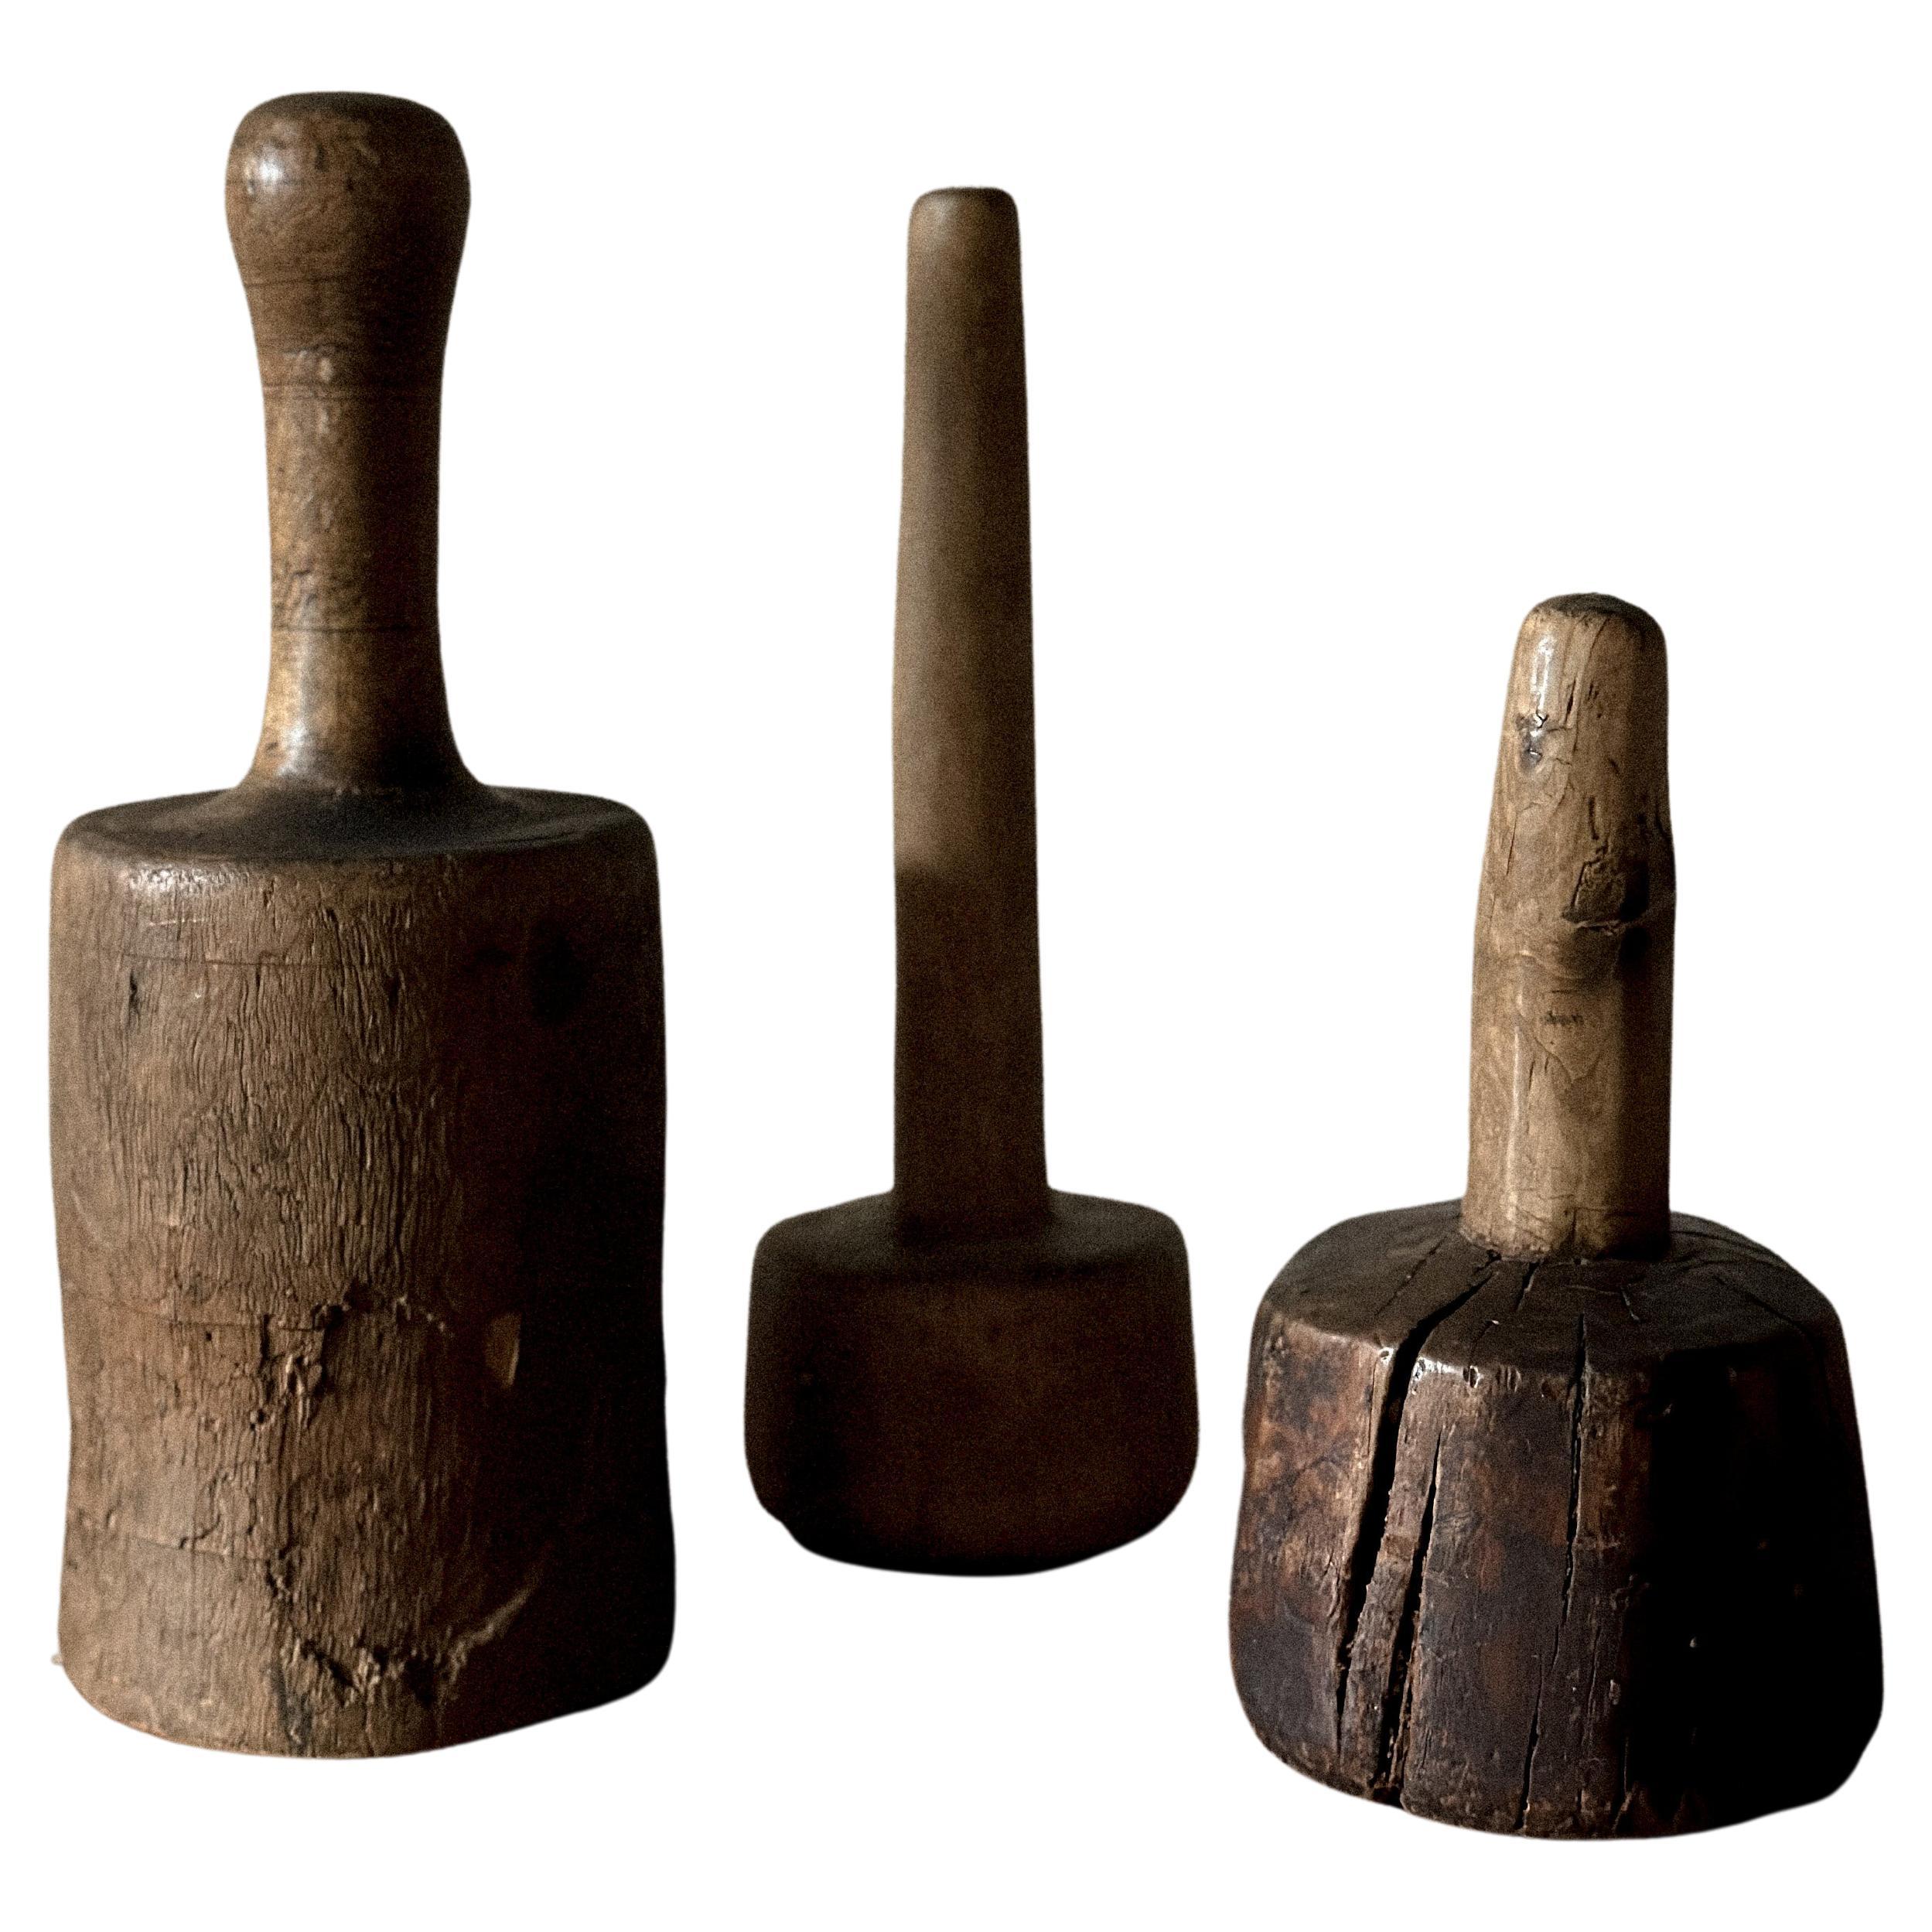 A Trio of Antique Wooden Pestles from the 19th Century